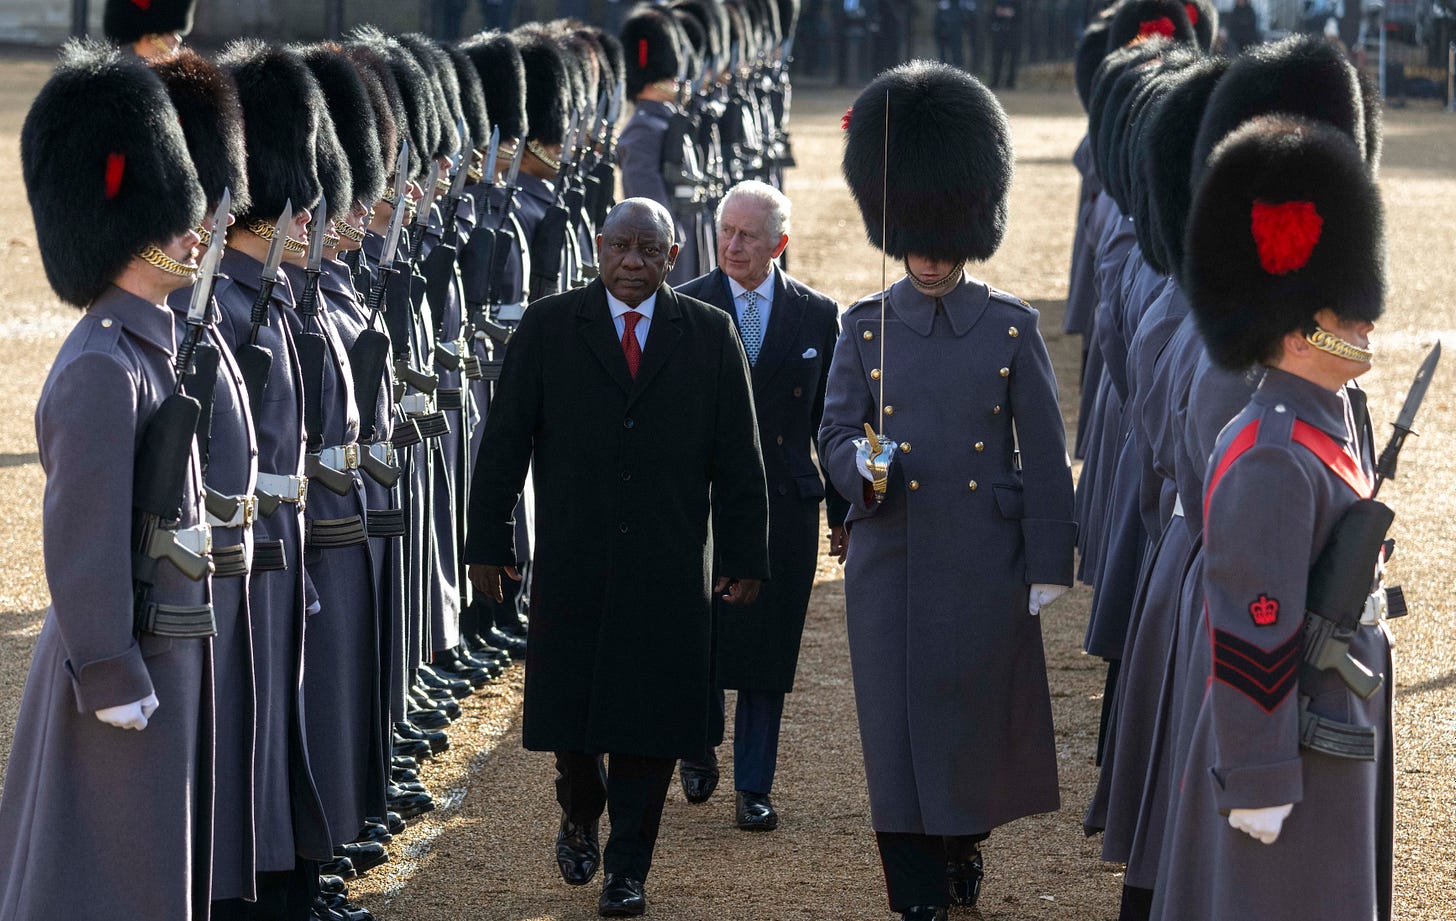 The King and South Africa's President inspect a Guard of Honour.